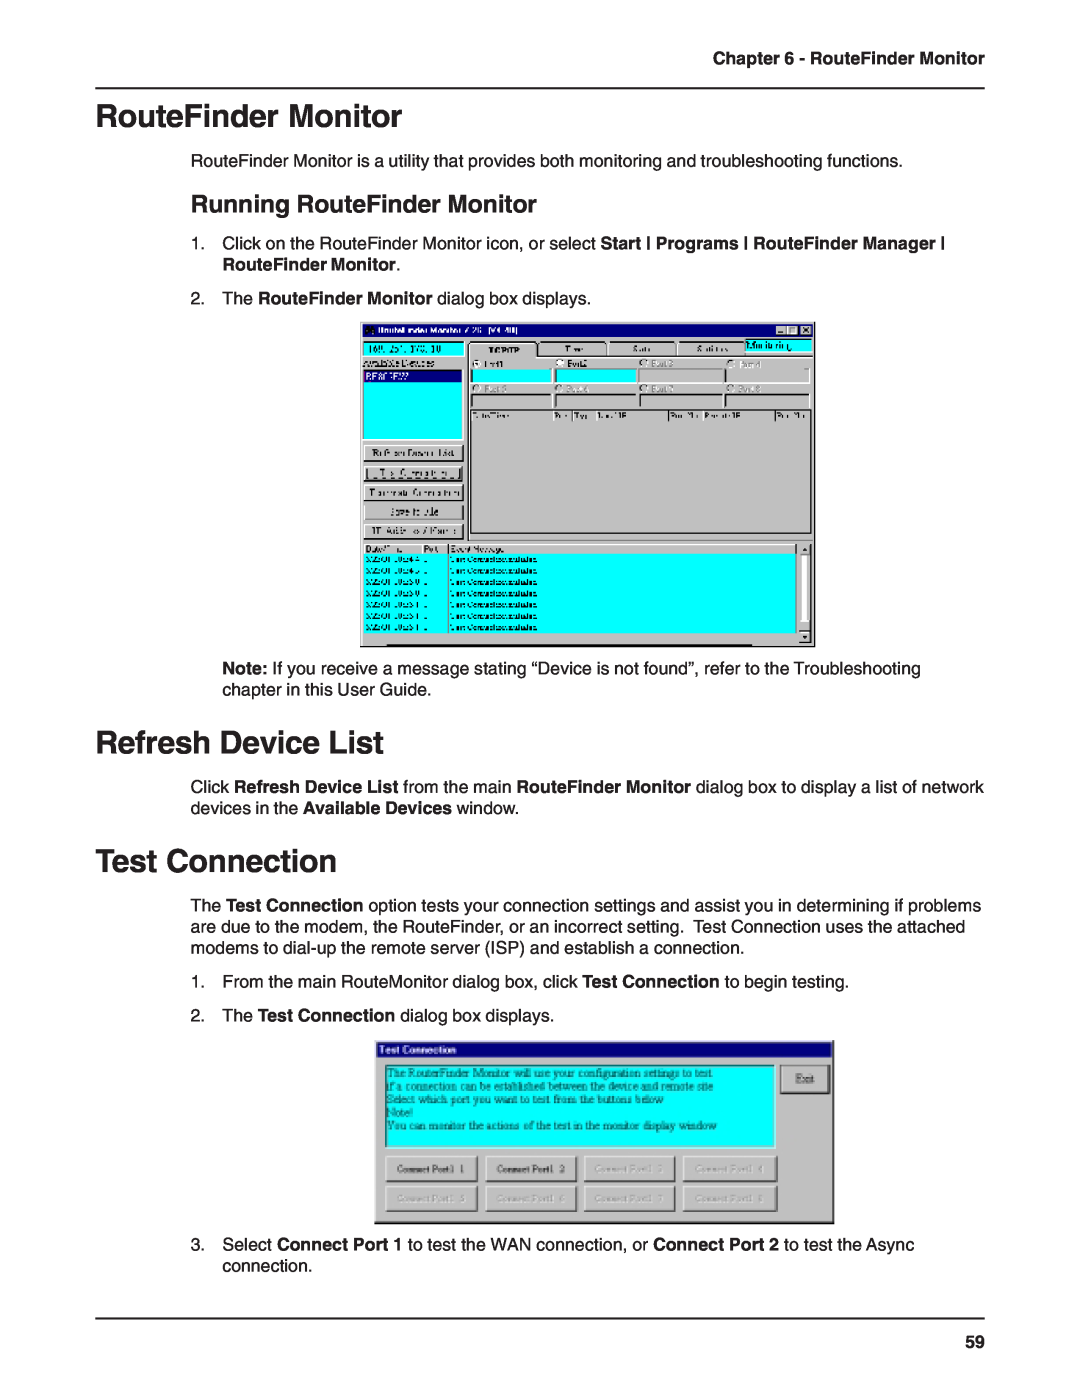 Multi-Tech Systems RF802EW manual Test Connection, Running RouteFinder Monitor, Refresh Device List 